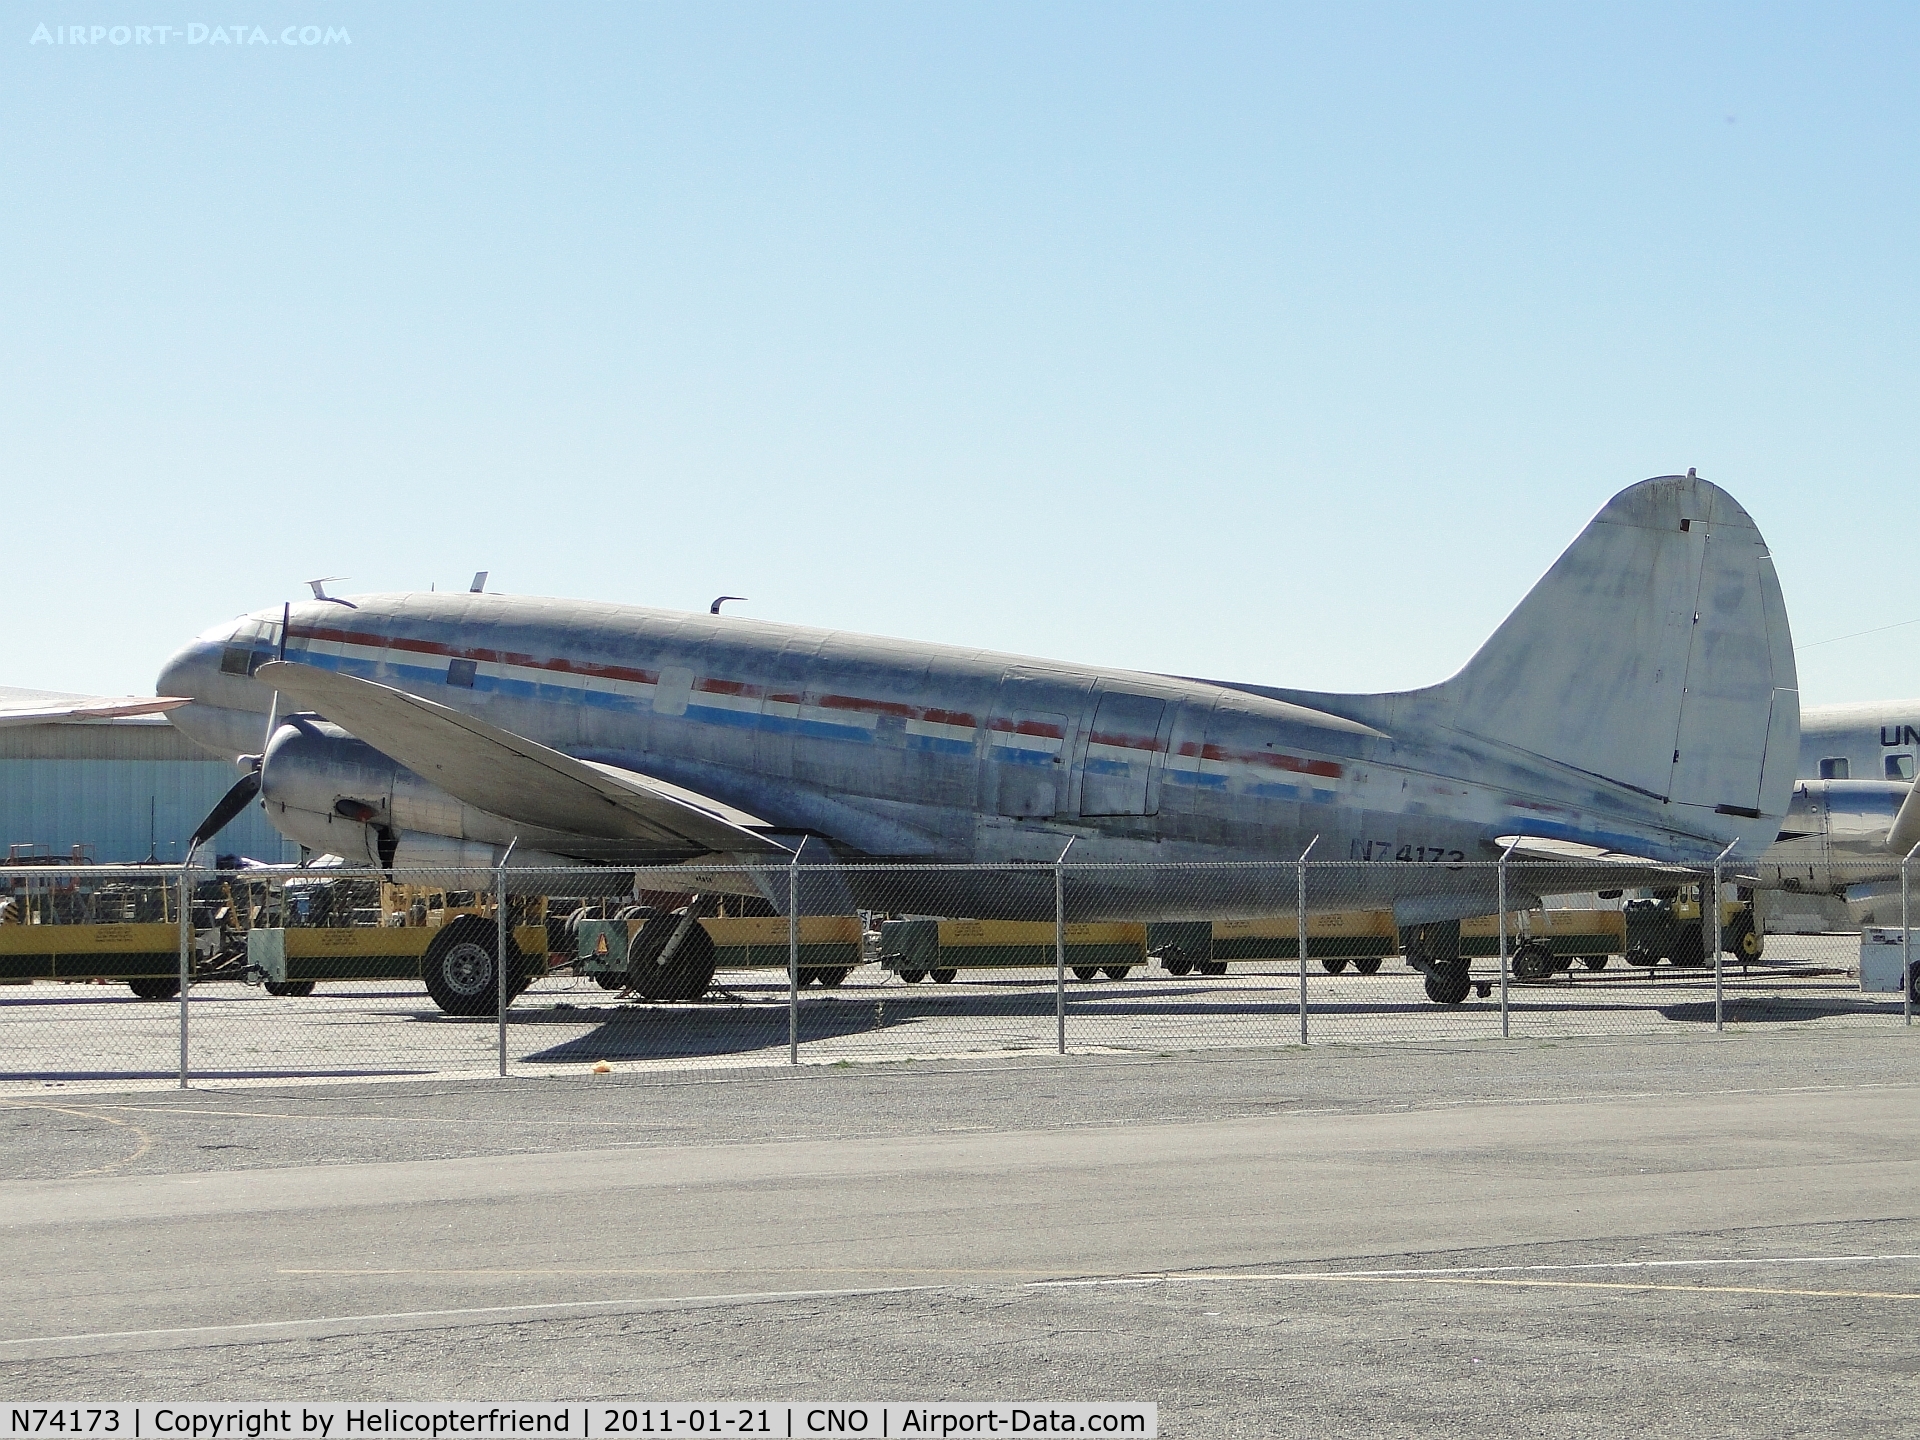 N74173, 1959 Curtiss C-46A Commando C/N 289, Parked in Yank's Museum restore area